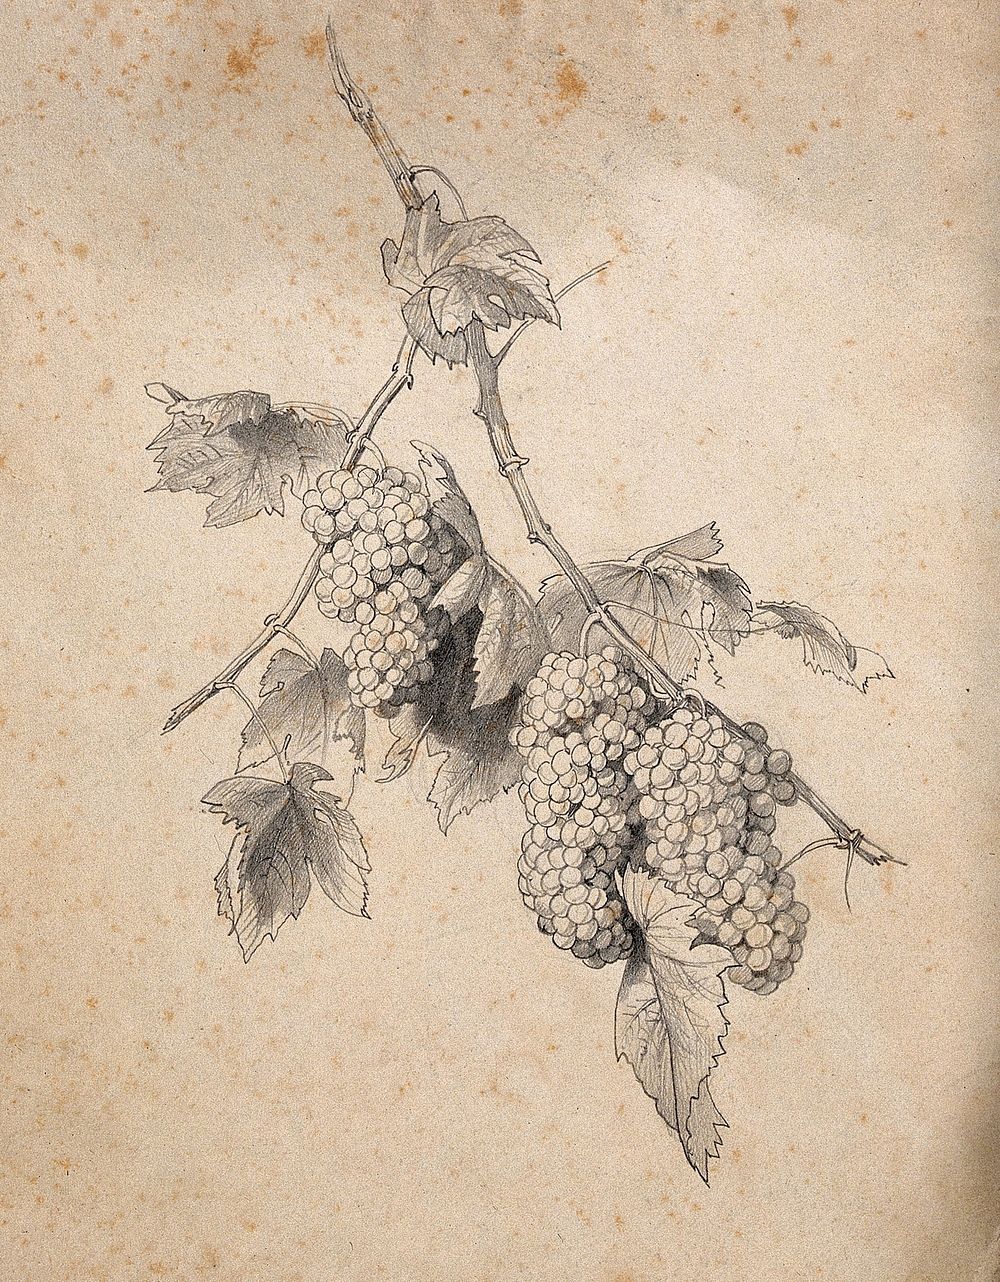 Grape vine with fruit and leaves. Pencil drawing.